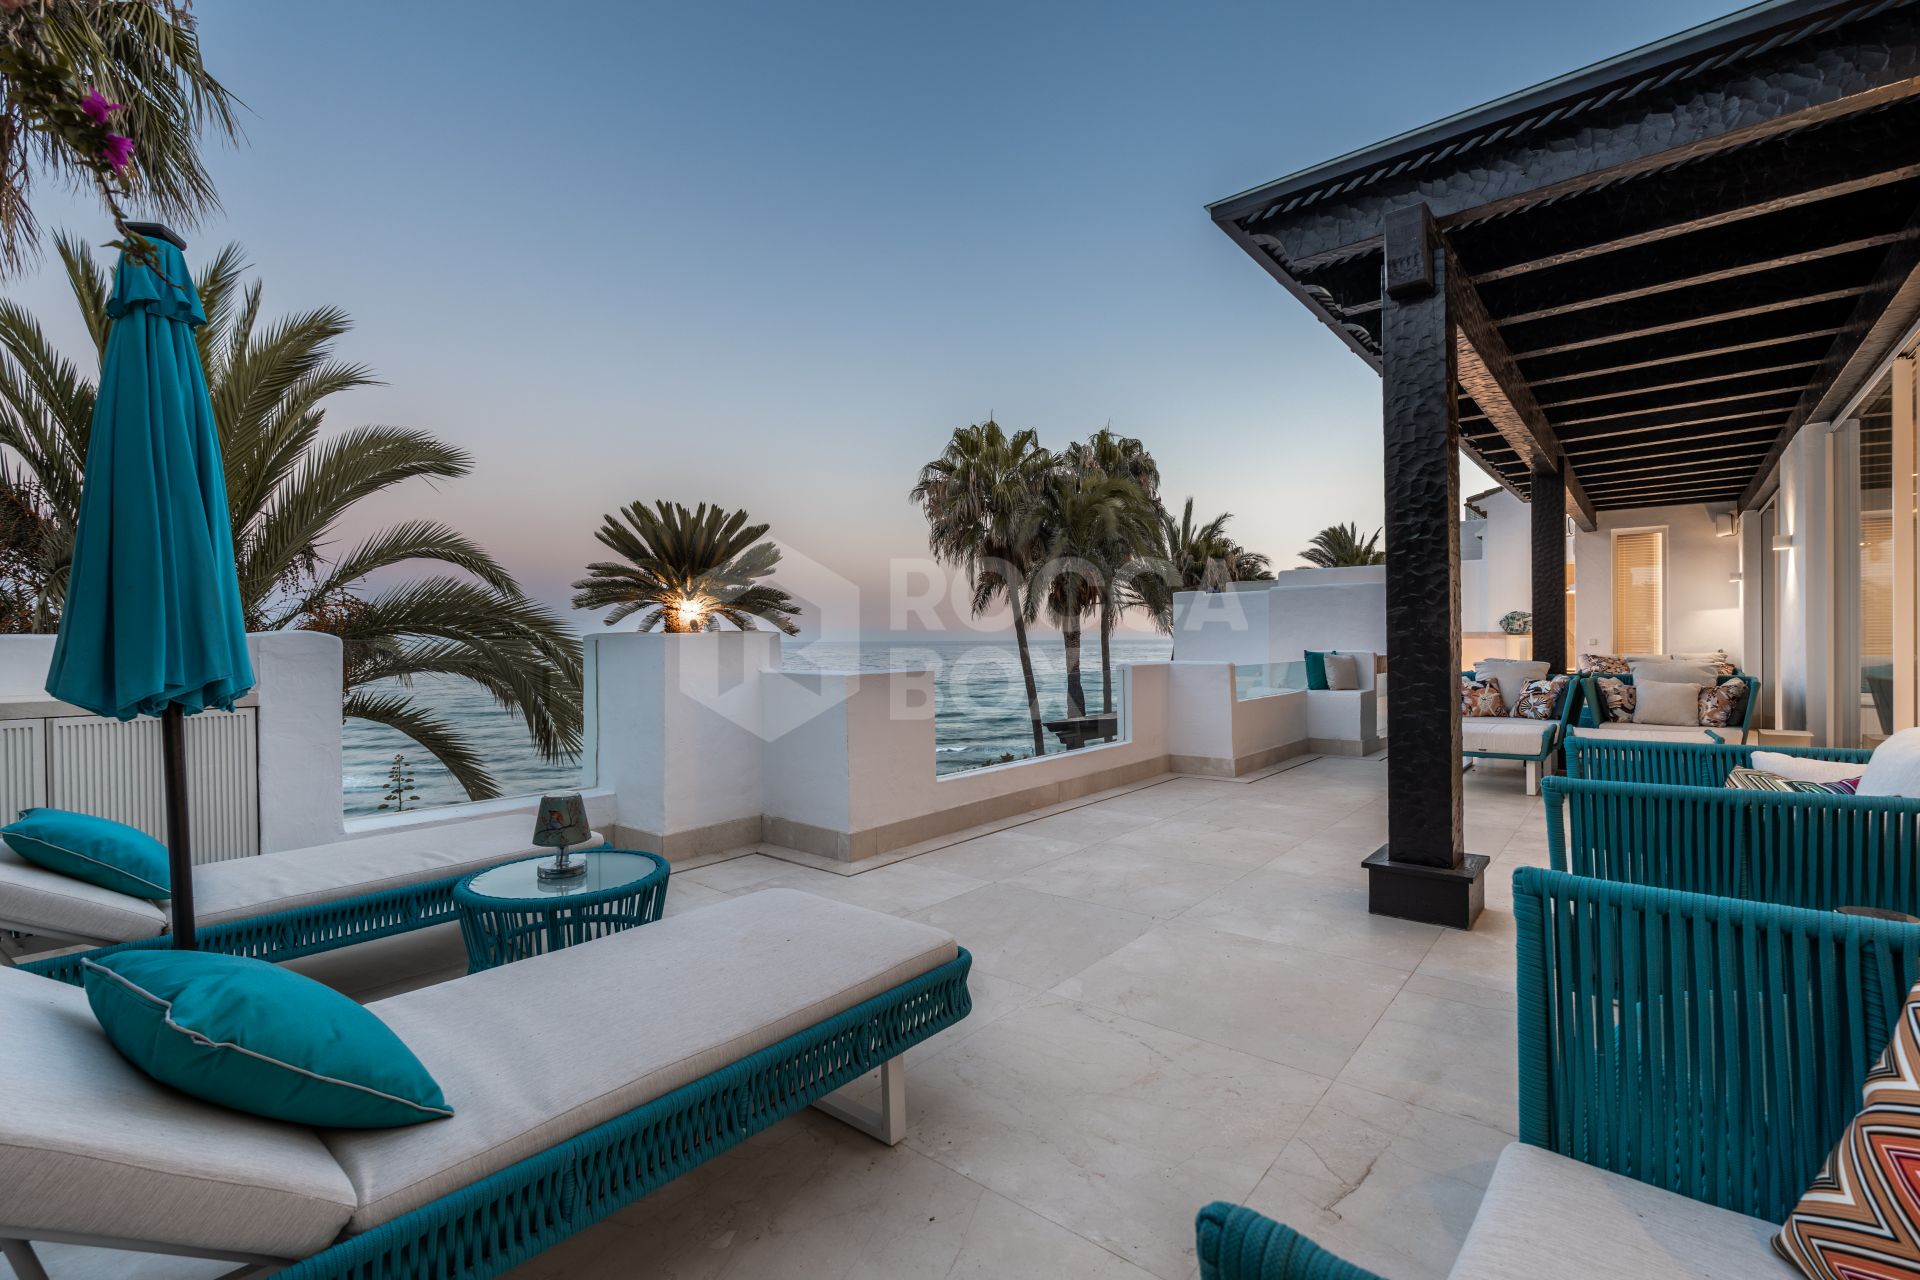 Penthouse One- the Ultimate One-of-a-Kind Frontline Beach Property in Marbella's Puente Romano